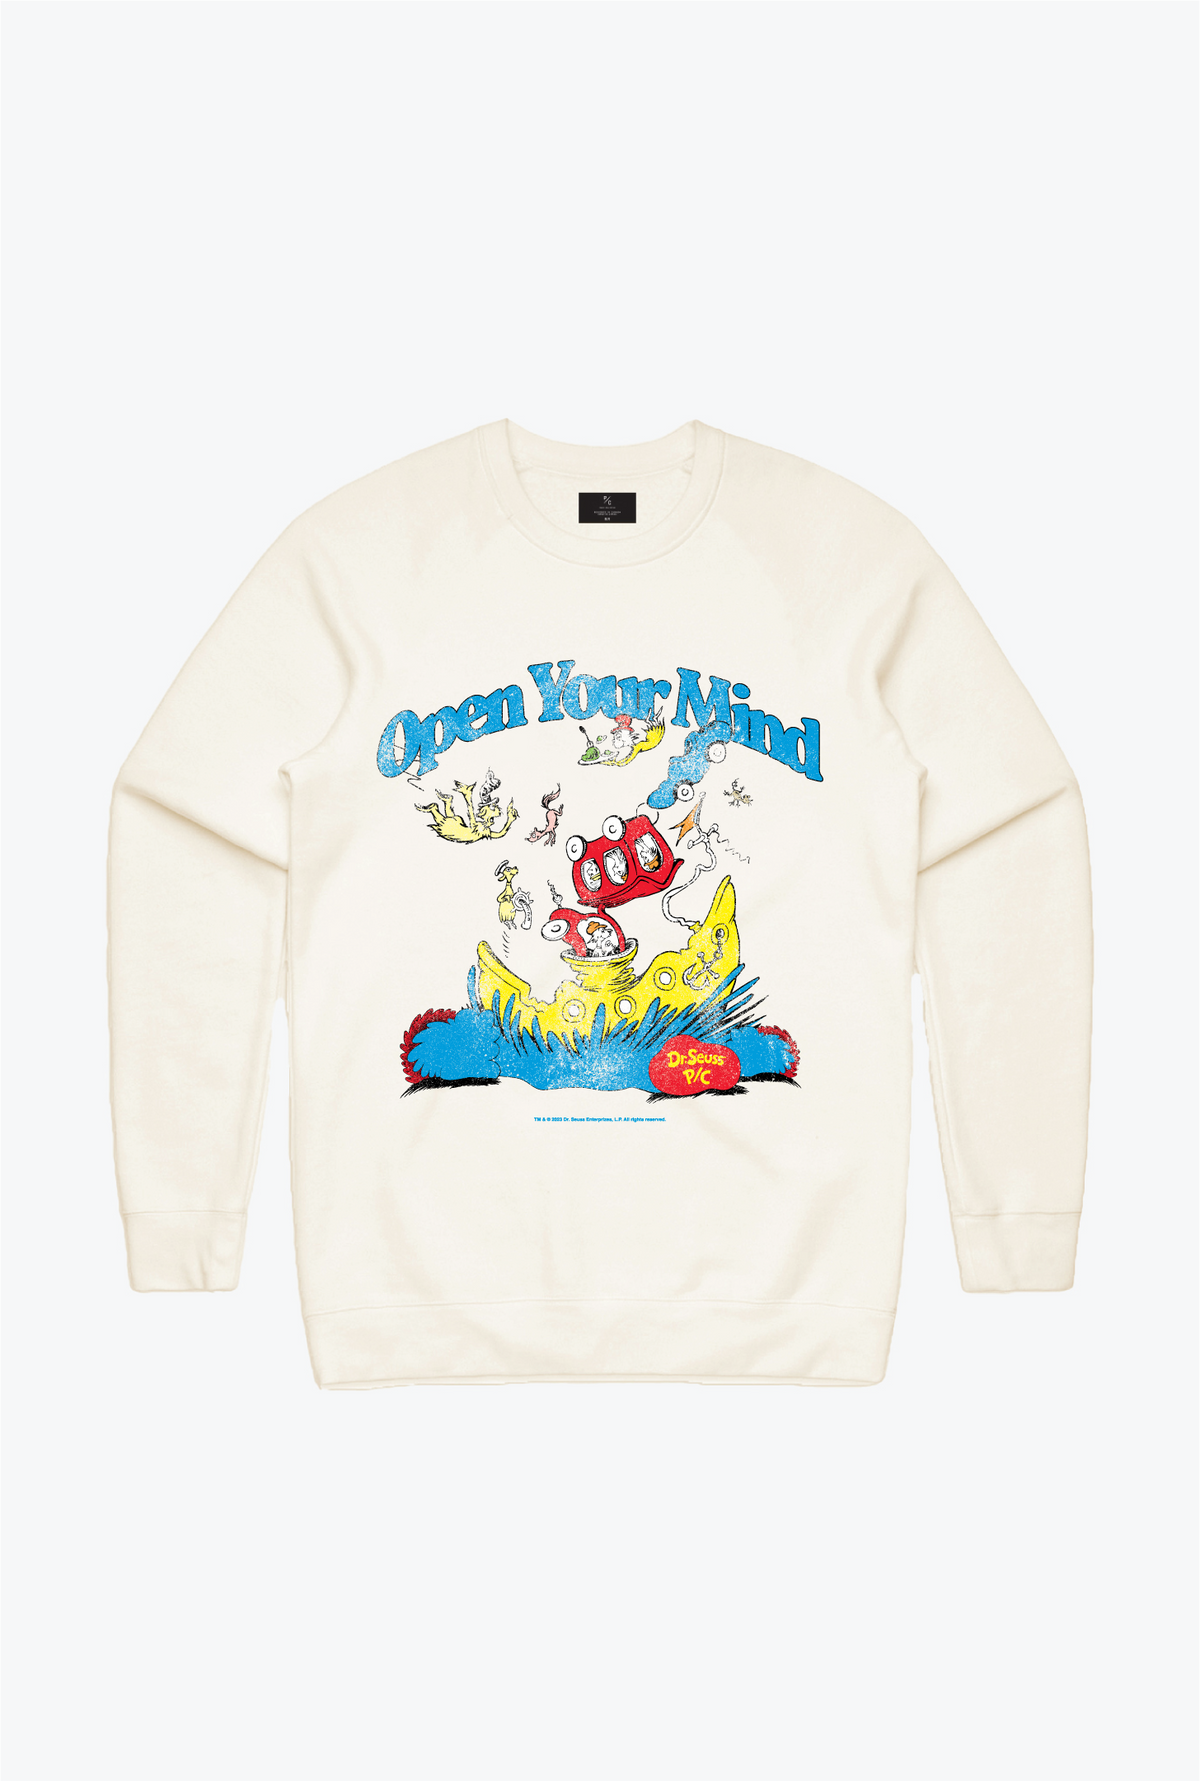 Green Eggs and Ham Open Your Mind Crewneck - Ivory